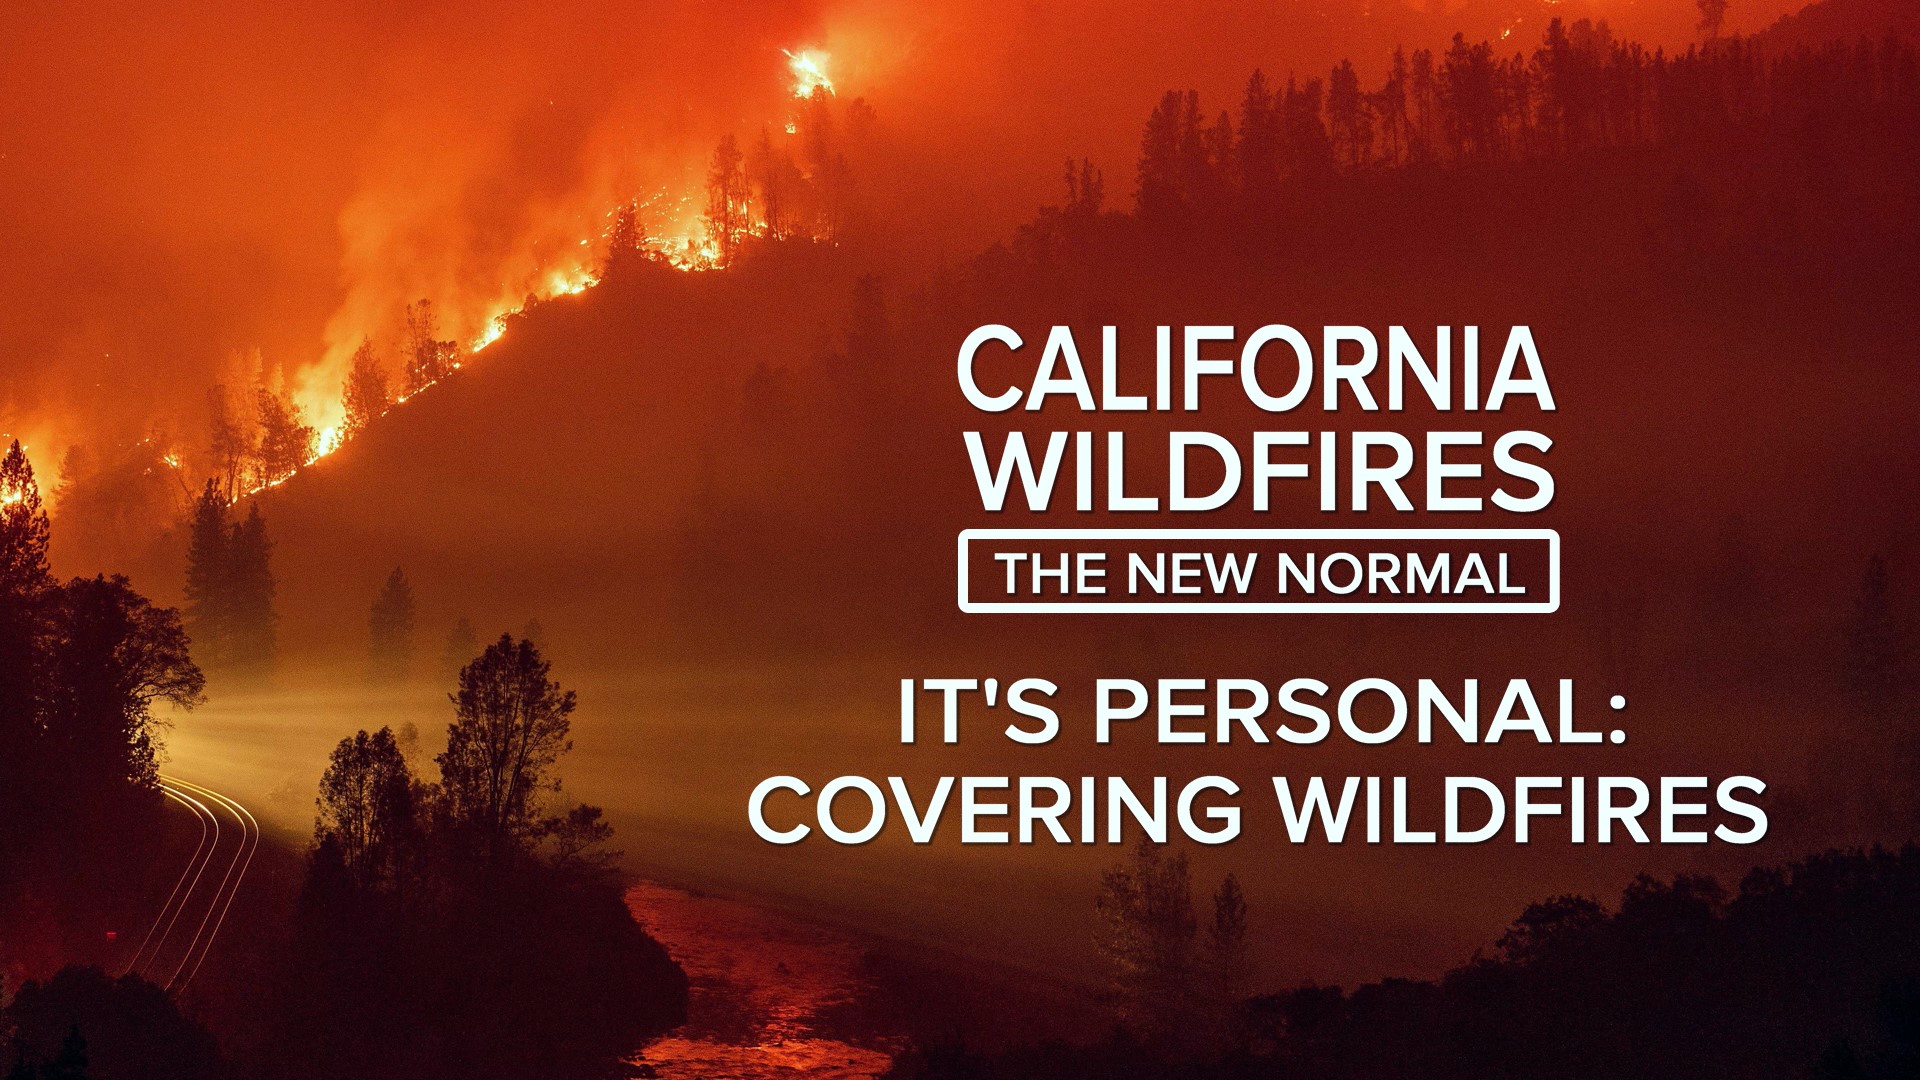 ABC10 Originals presents a 9-part series, California Wildfires: The New Normal. Liz Kreutz, Madison Meyer, John Bartell, Michael Anthony Adams, Lilia Luciano, and Brandon Rittiman take you inside wildfire coverage and tell us why these stories are persona